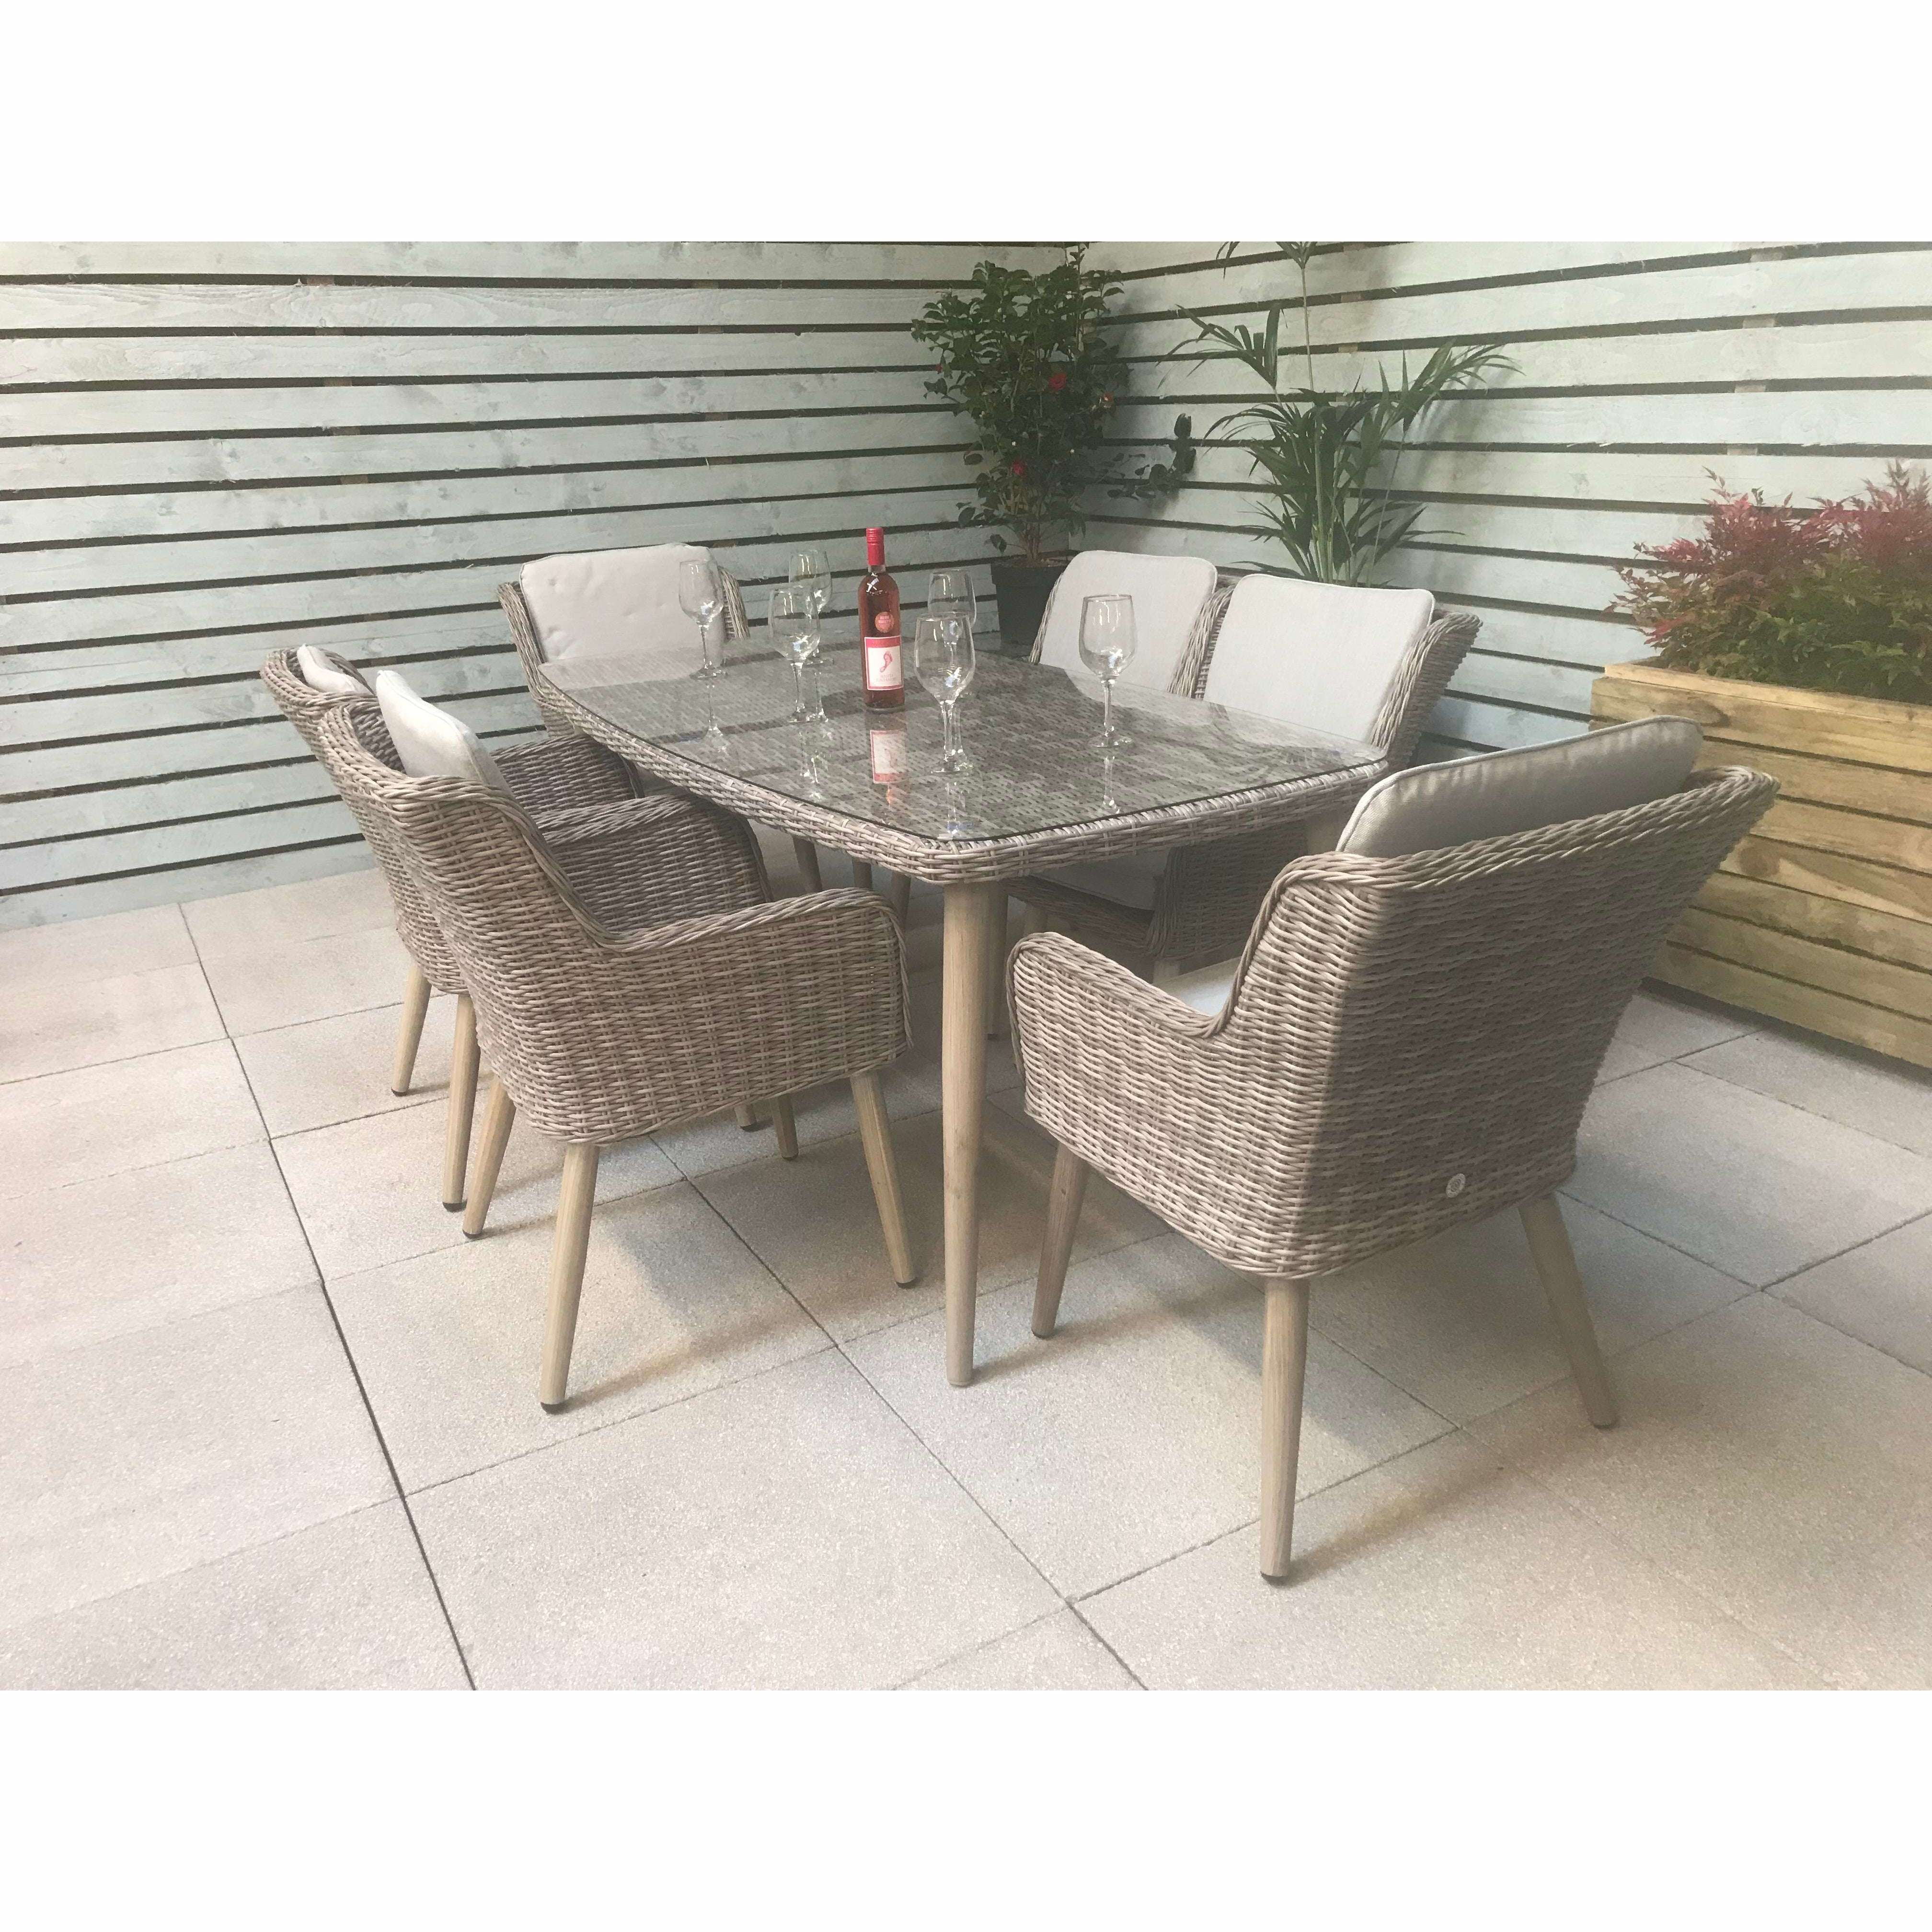 Exceptional Garden:Signature Weave Danielle 6-Seater Dining Set